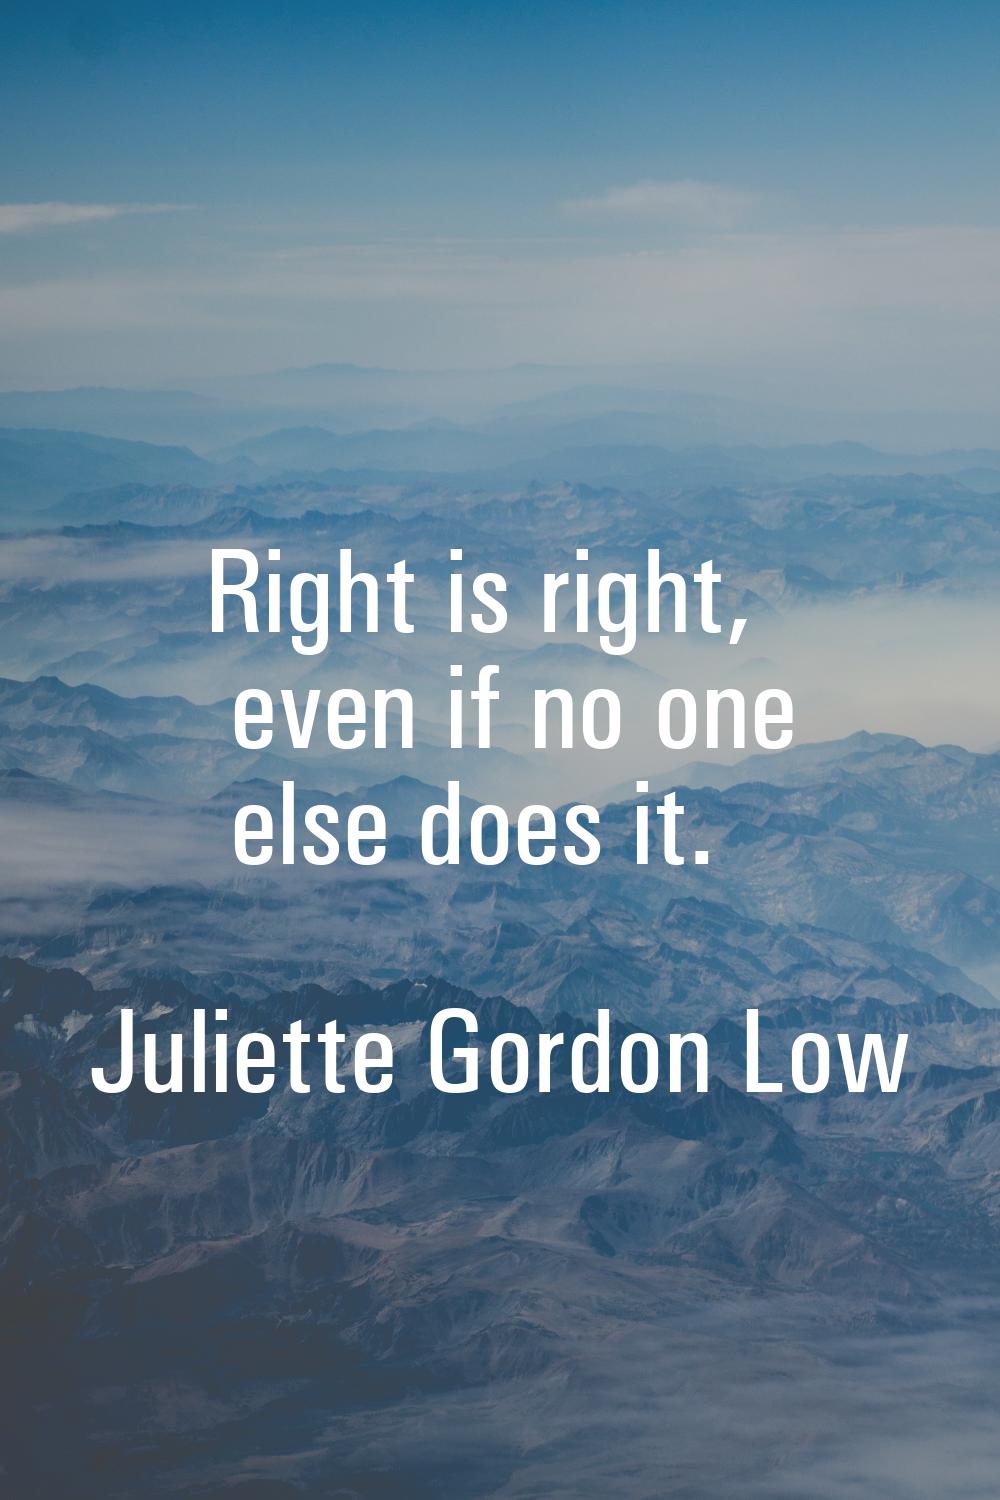 Right is right, even if no one else does it.